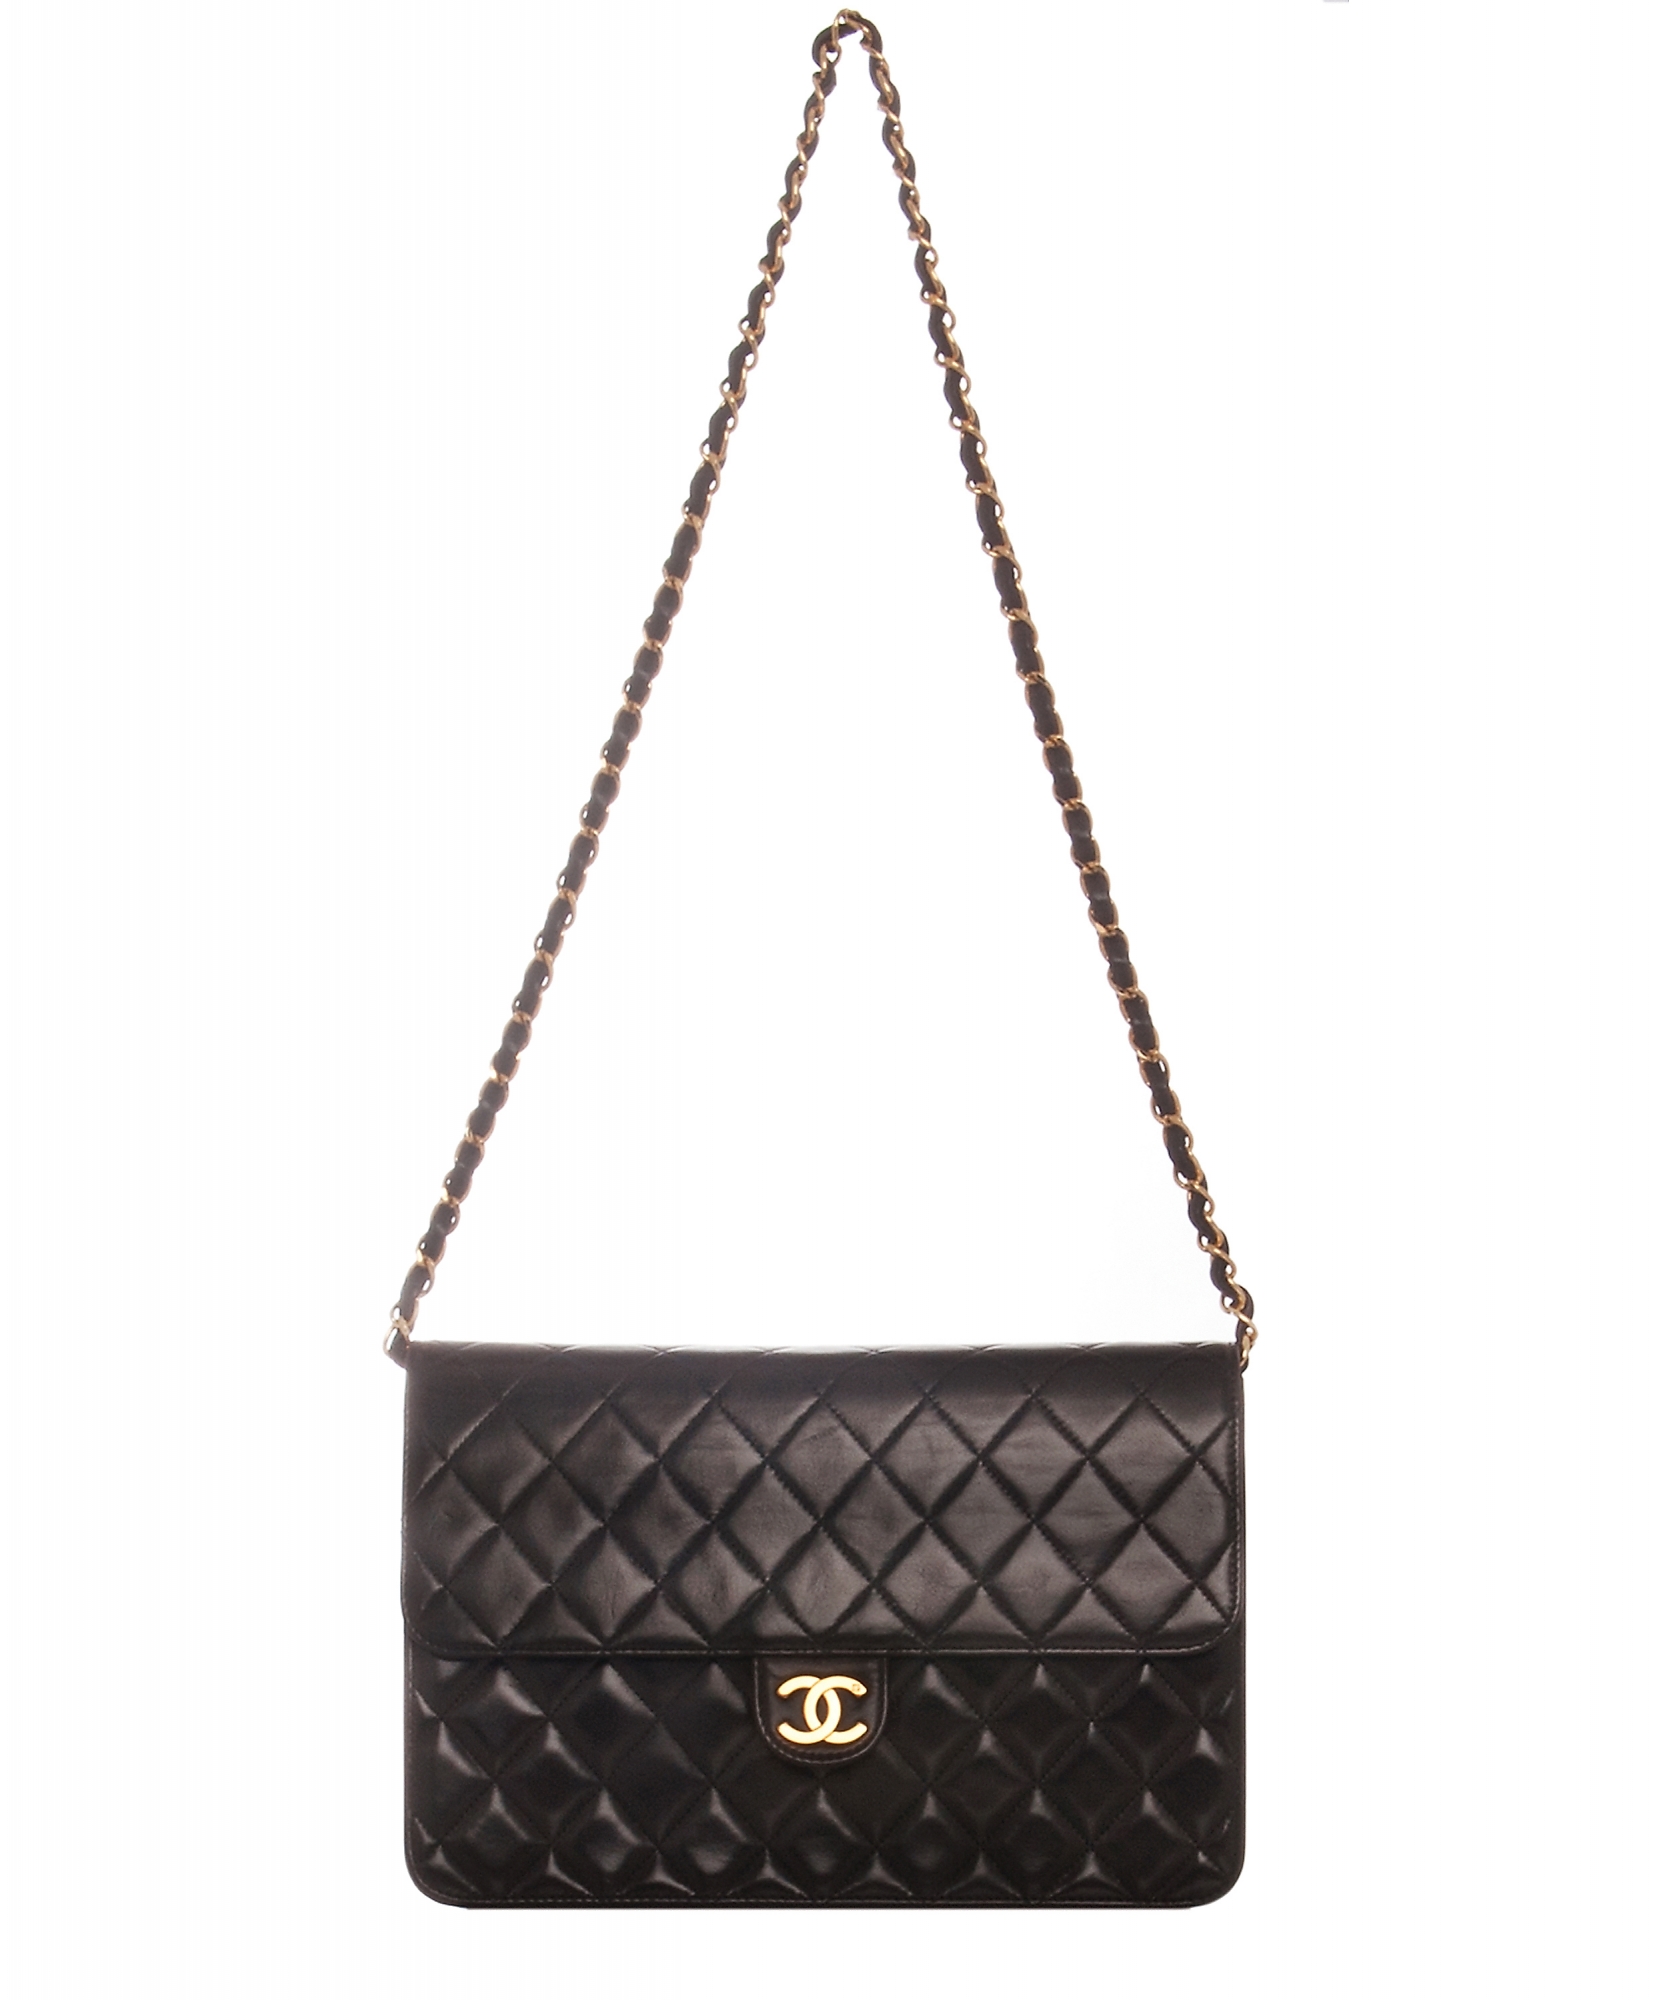 Vintage Chanel Bags The best places to buy and sell authentic Chanel items   Vintage chanel bag Chanel bag Vintage chanel